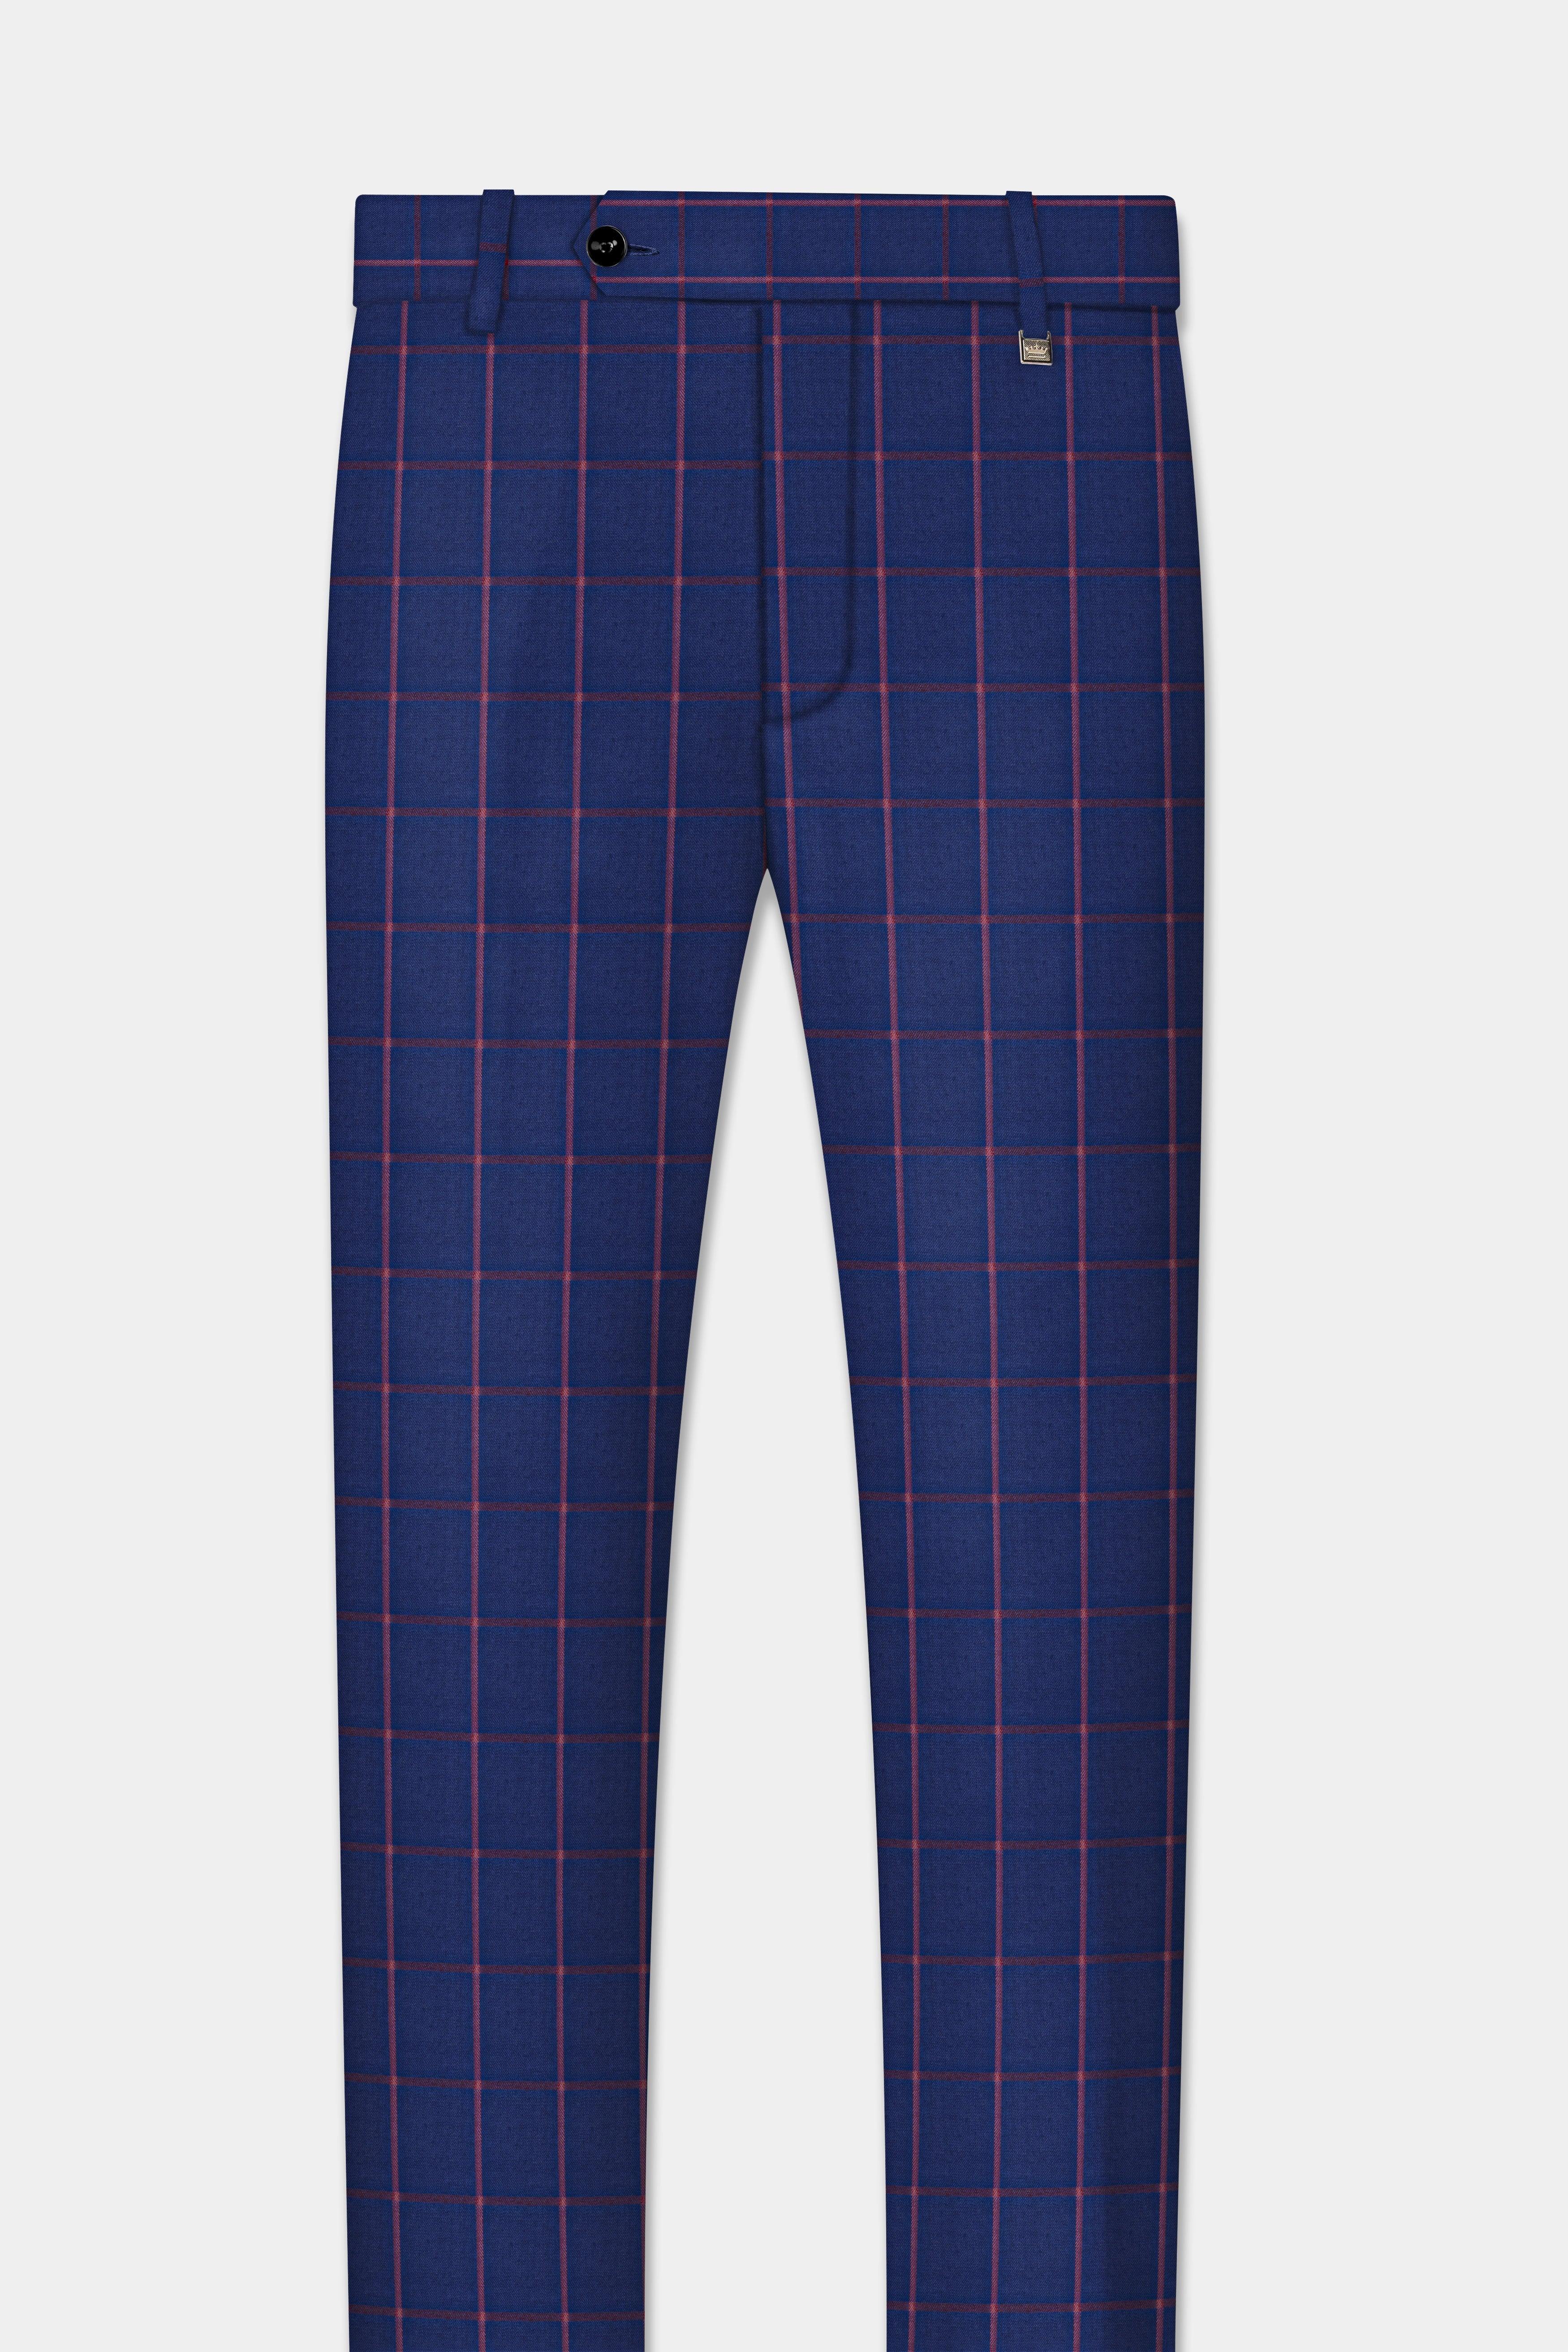 Biscay Blue with Raspberry Pink Windowpane Wool Blend Pant